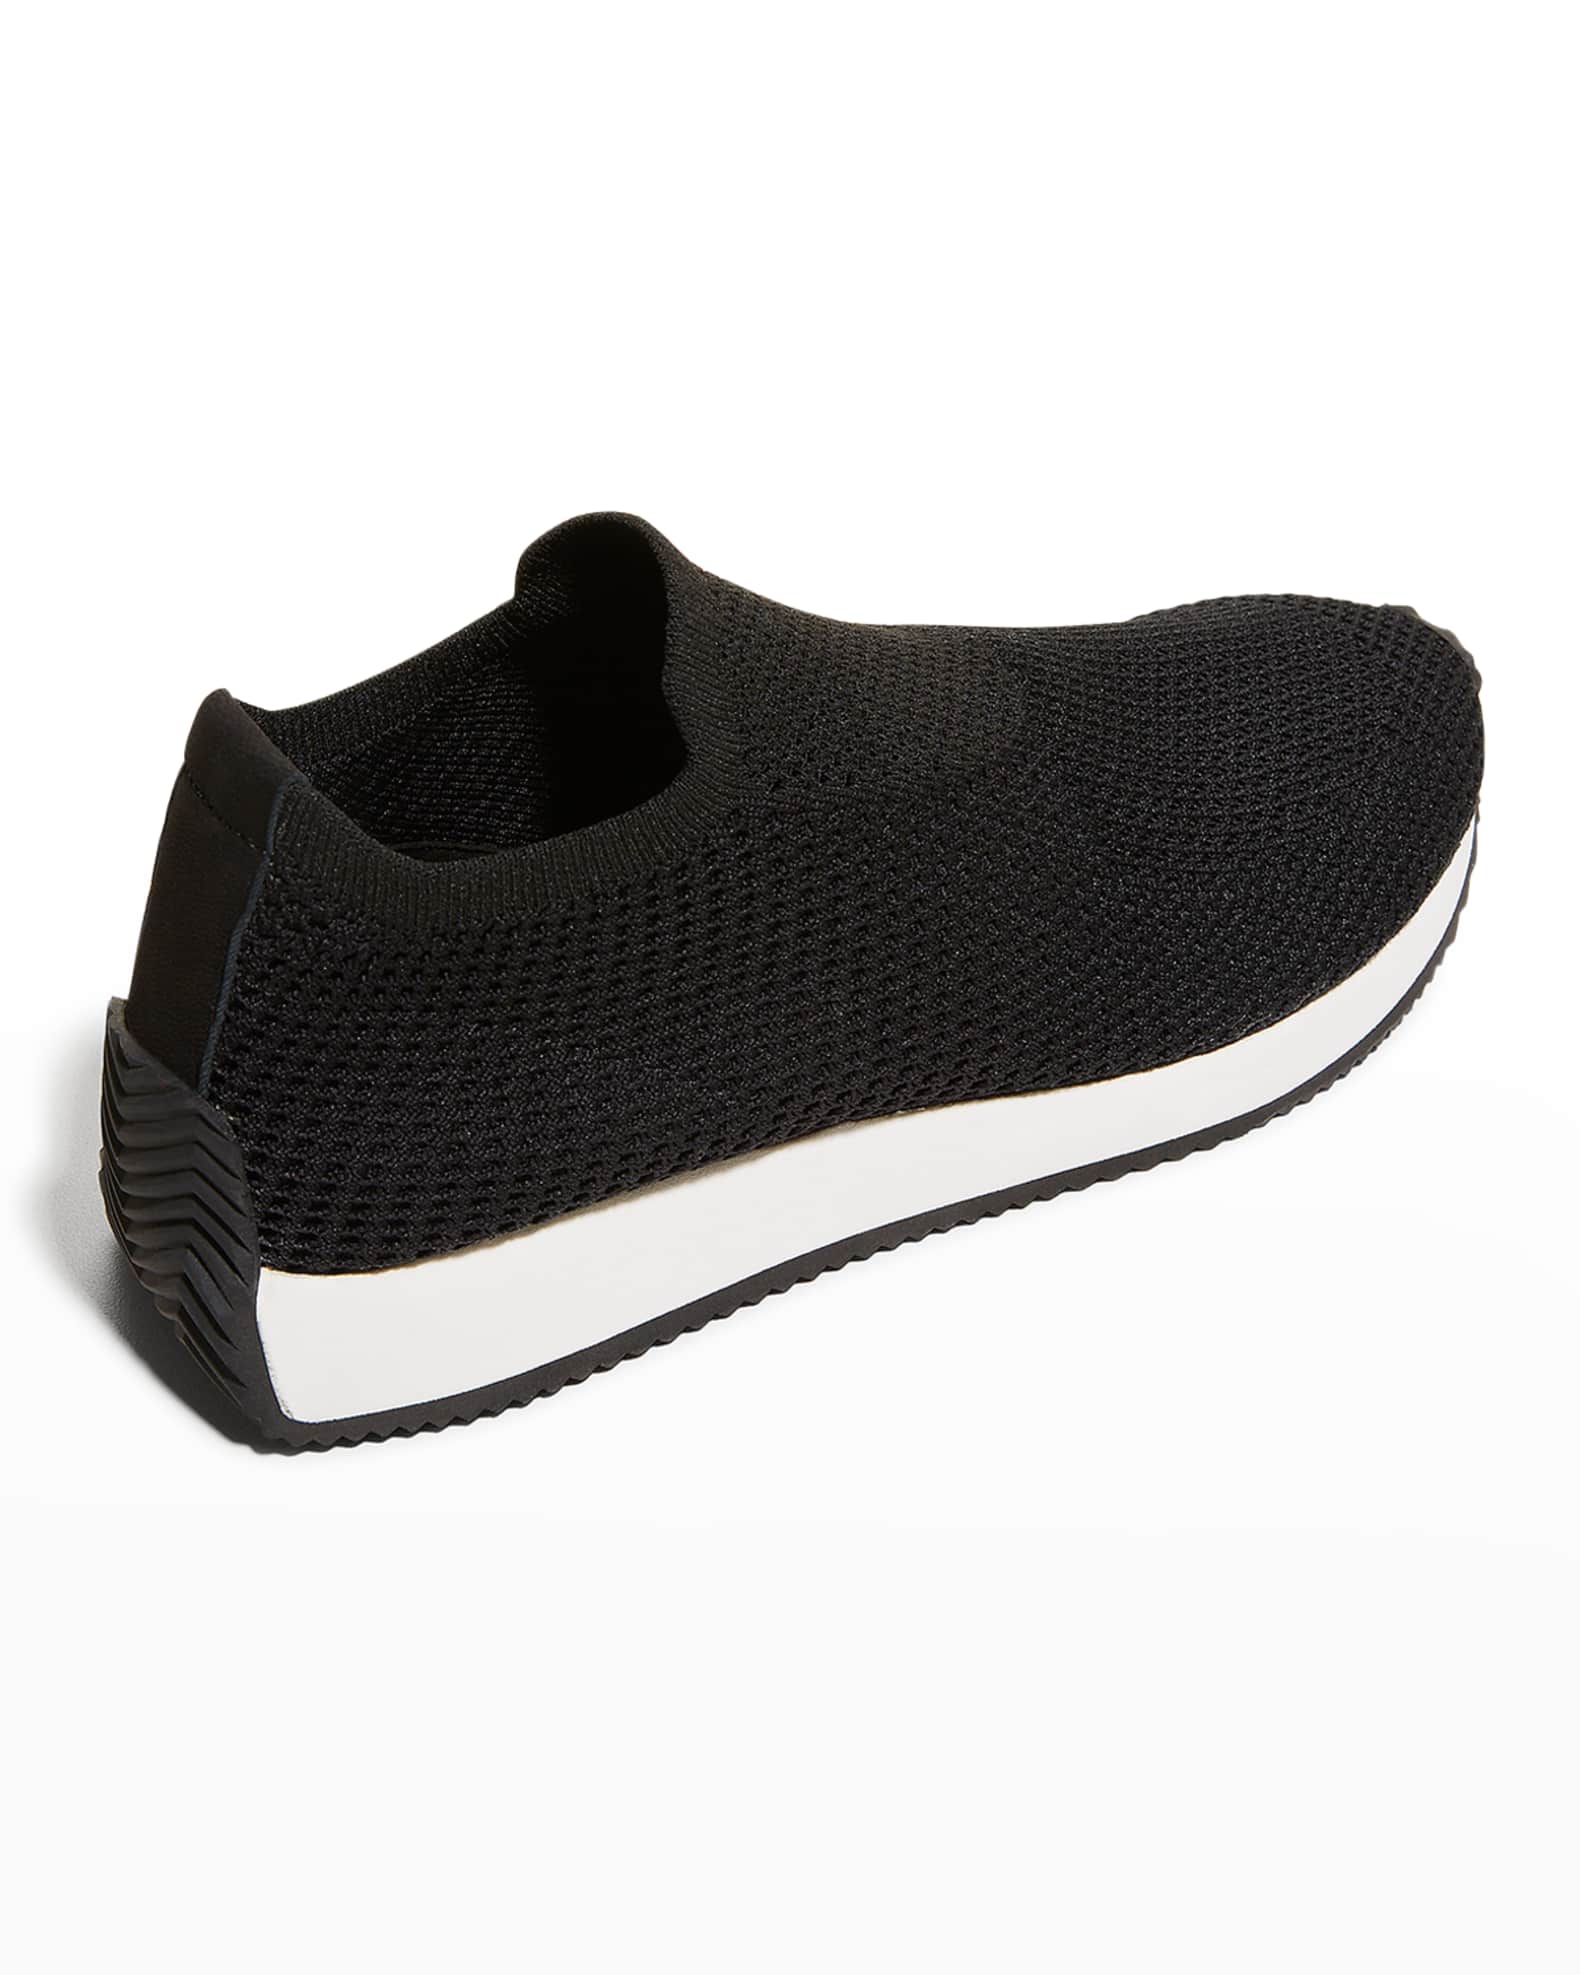 Eileen Fisher Humm Recycled Knit Pull-On Sneakers | Neiman Marcus